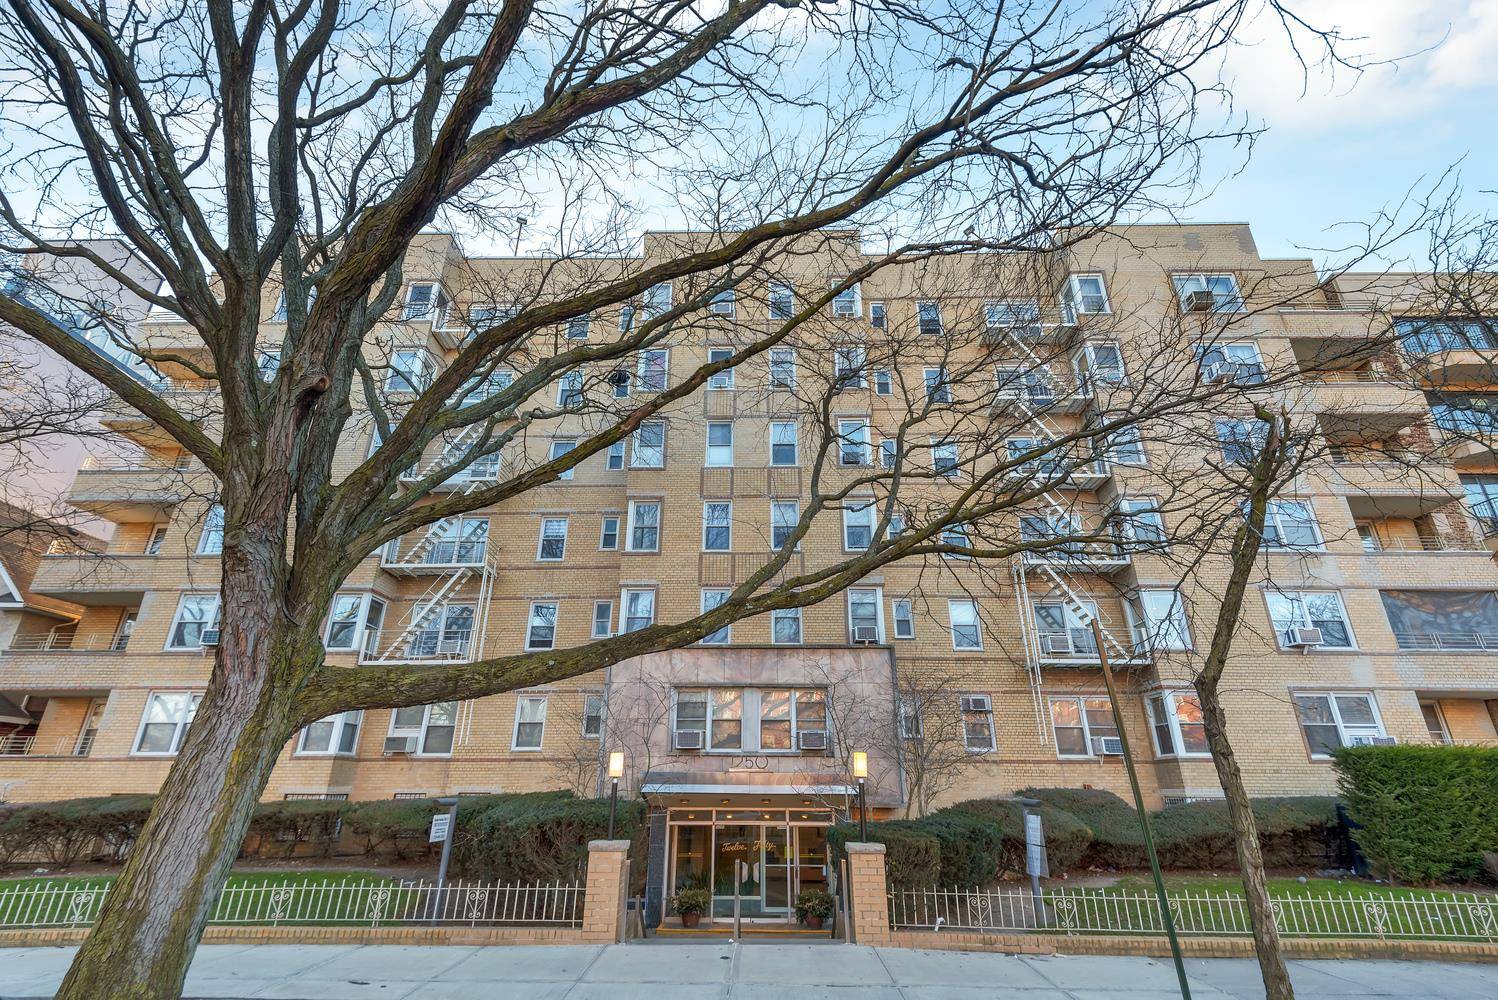 SHOWING BY APPOINTMENT ON SUNDAY APRIL 24, 2022 FROM 11 30 TO 12 30PM CALL TO SCHEDULE AN APPOINTMENT Welcome home to 1250 Ocean Parkway located in prime Midwood between ...